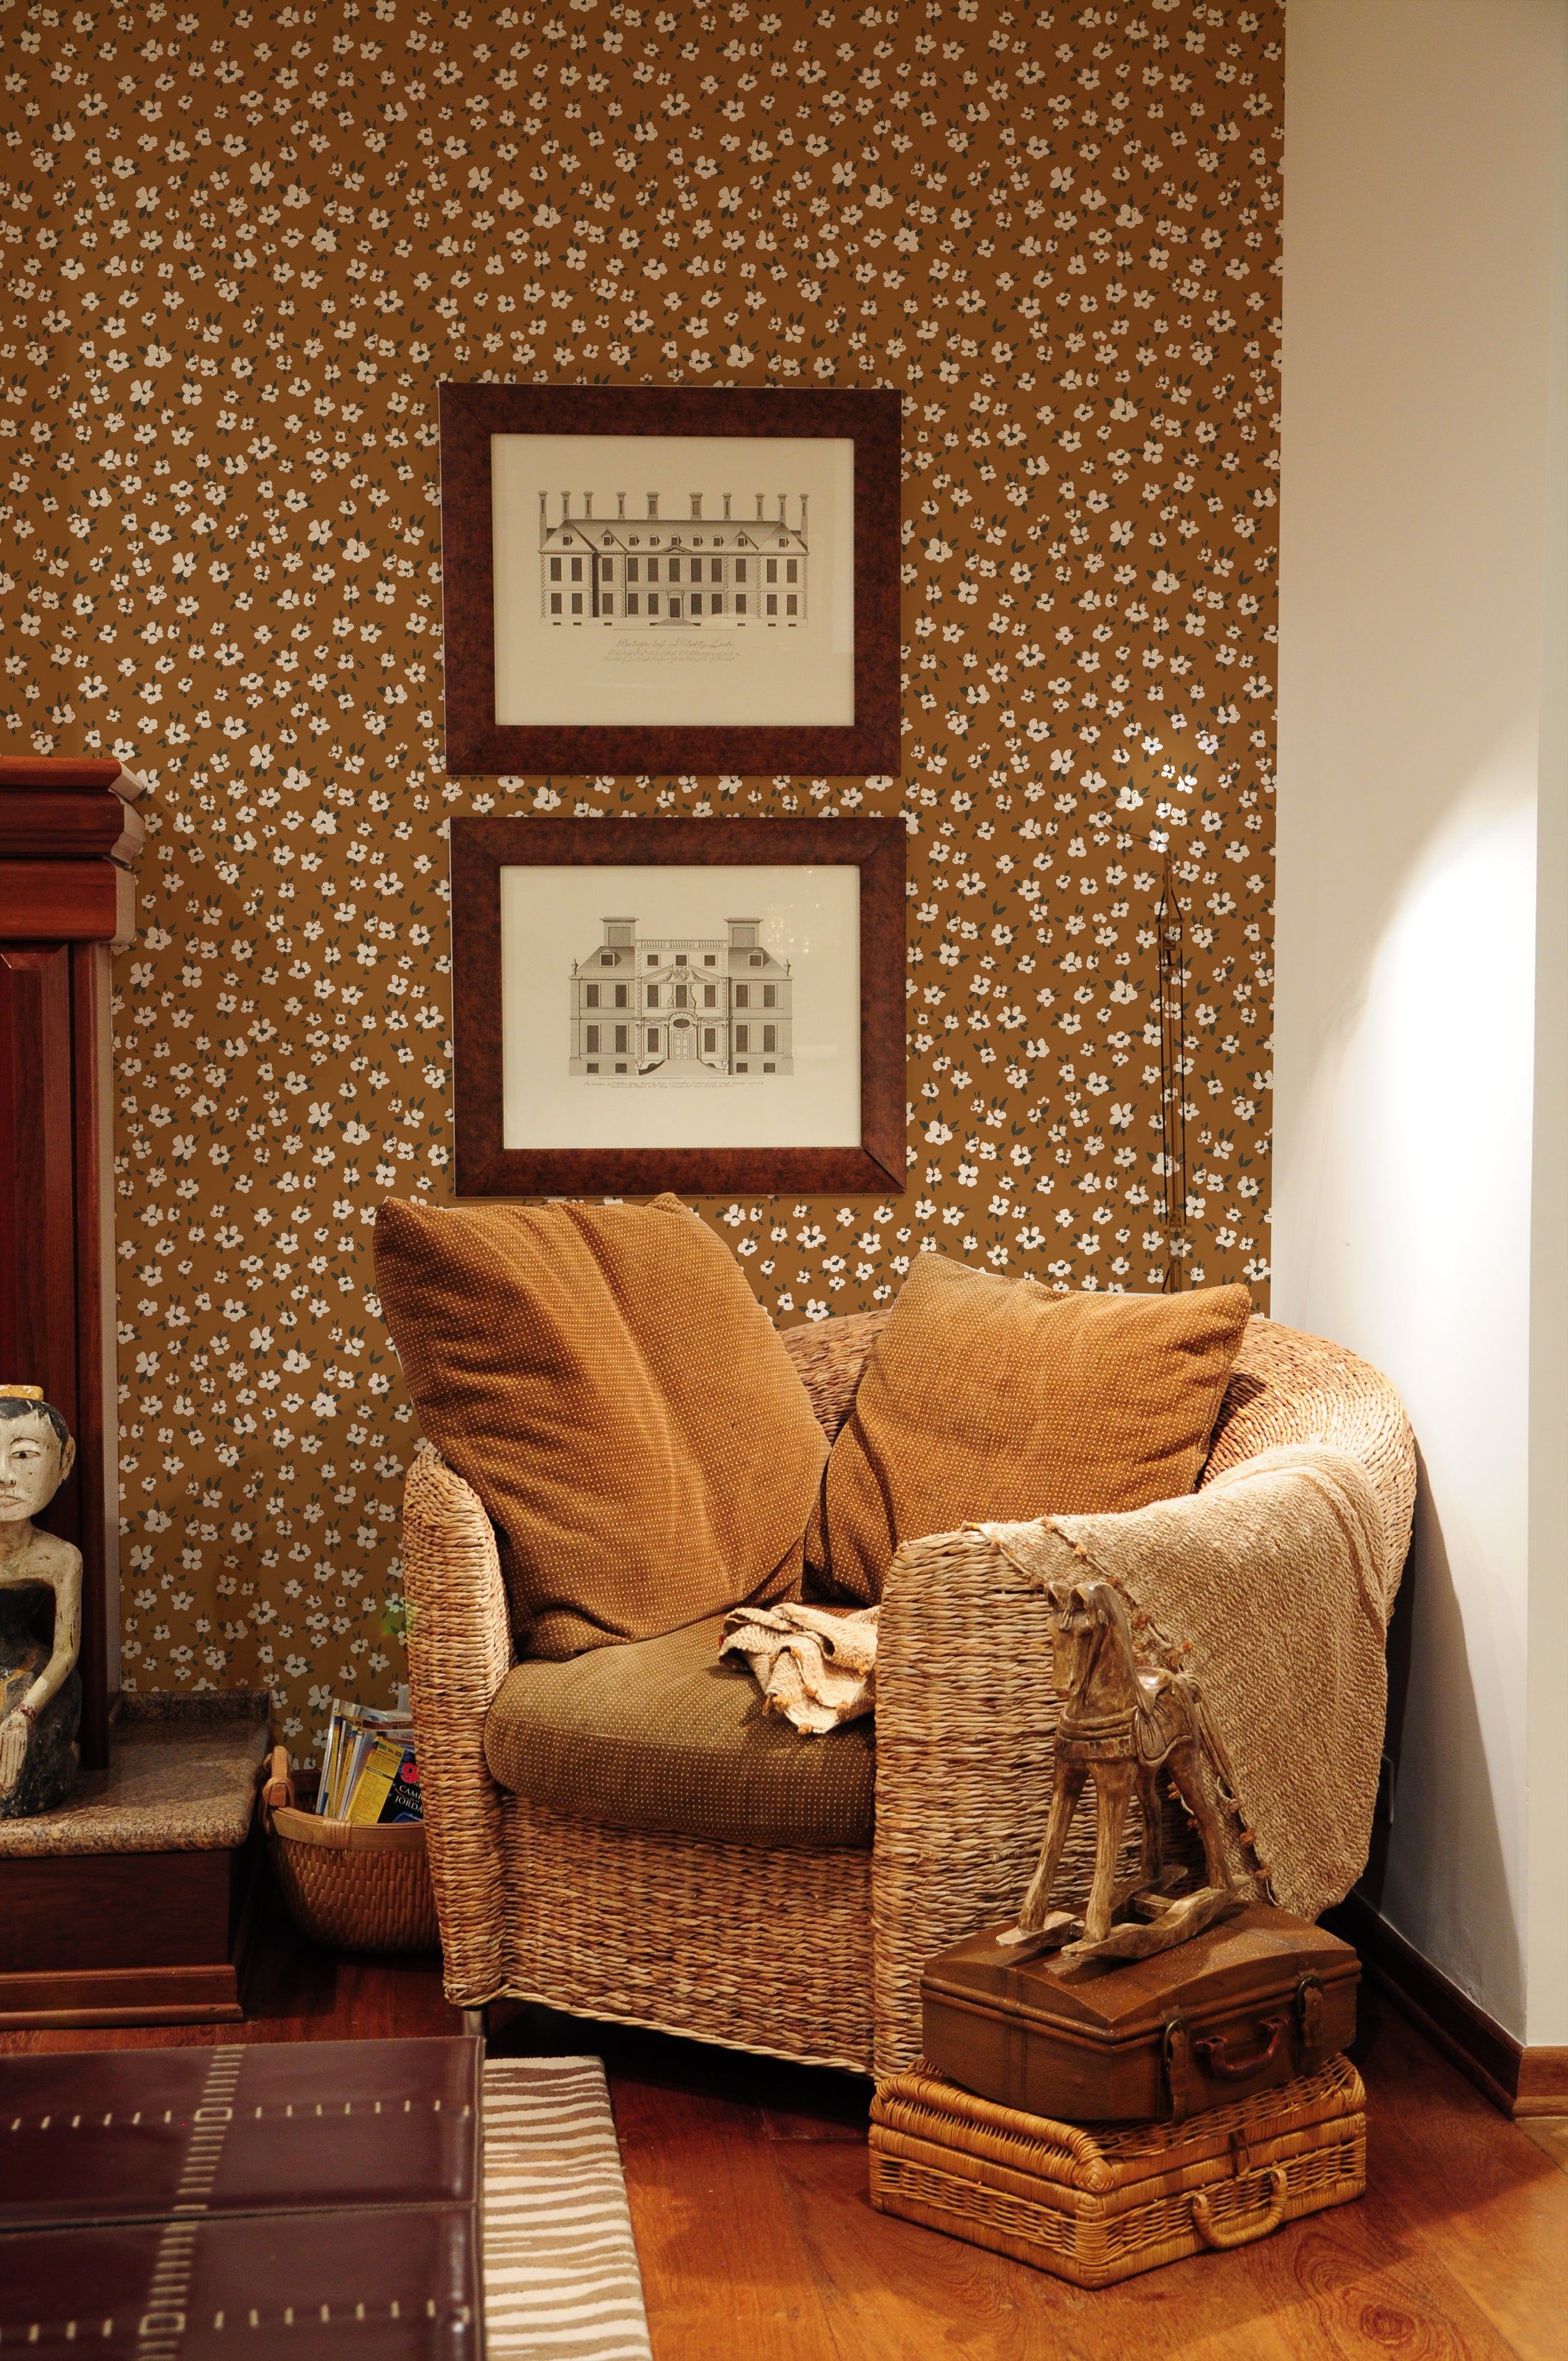 A stylish hallway featuring a brown leather chair against a wall covered in brown wallpaper with a white floral pattern, above white wainscoting, with a white deer head sculpture and coat rack